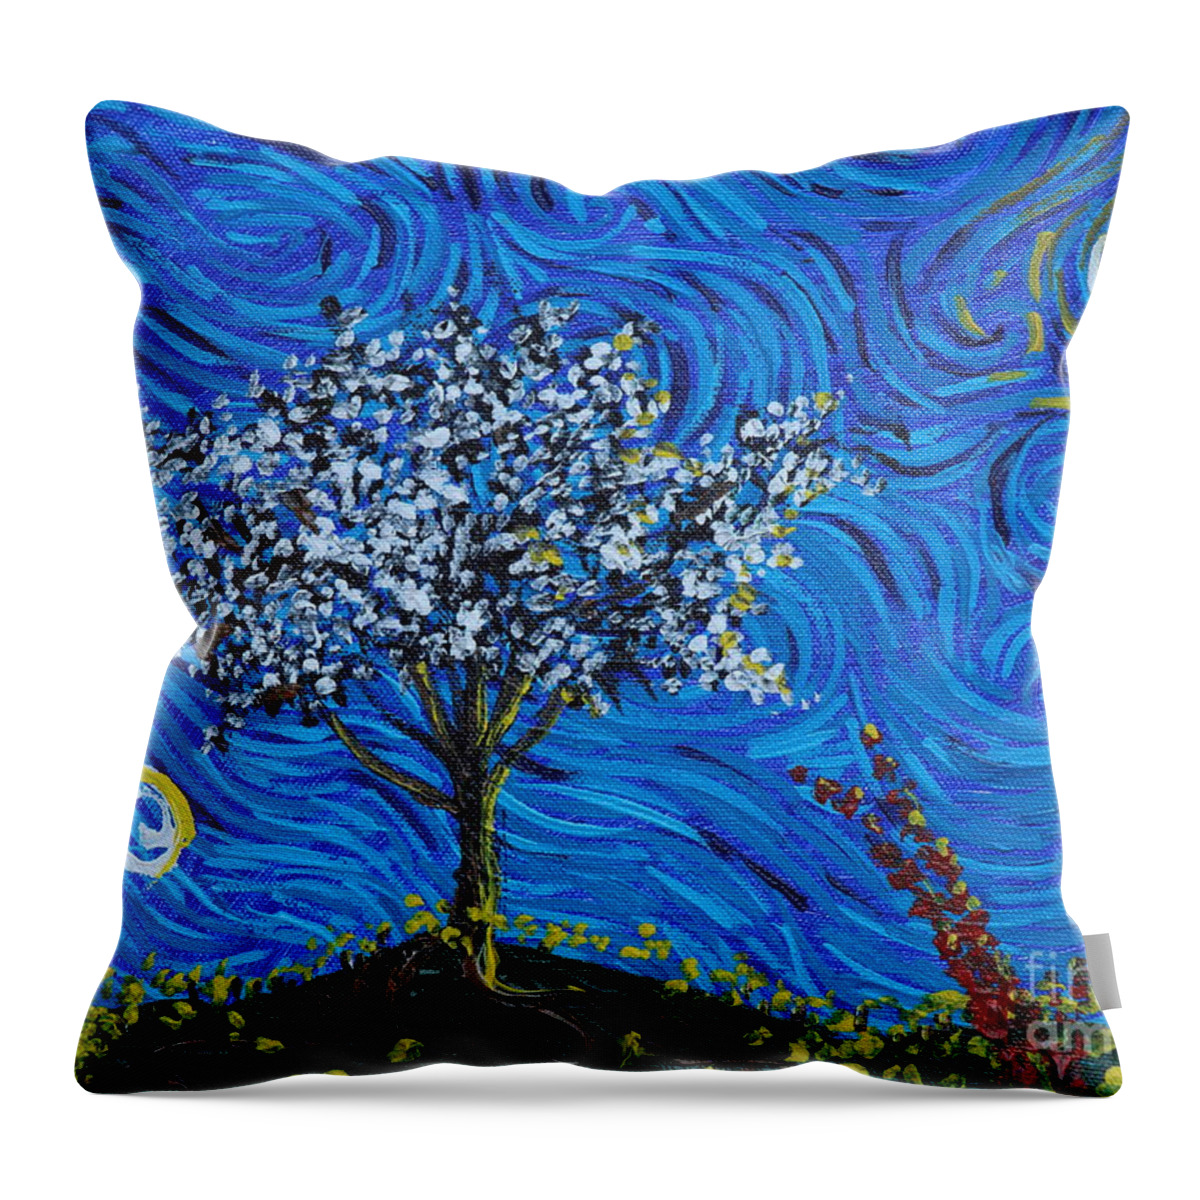 Landscape Throw Pillow featuring the painting When Squiggles Swim by Stefan Duncan